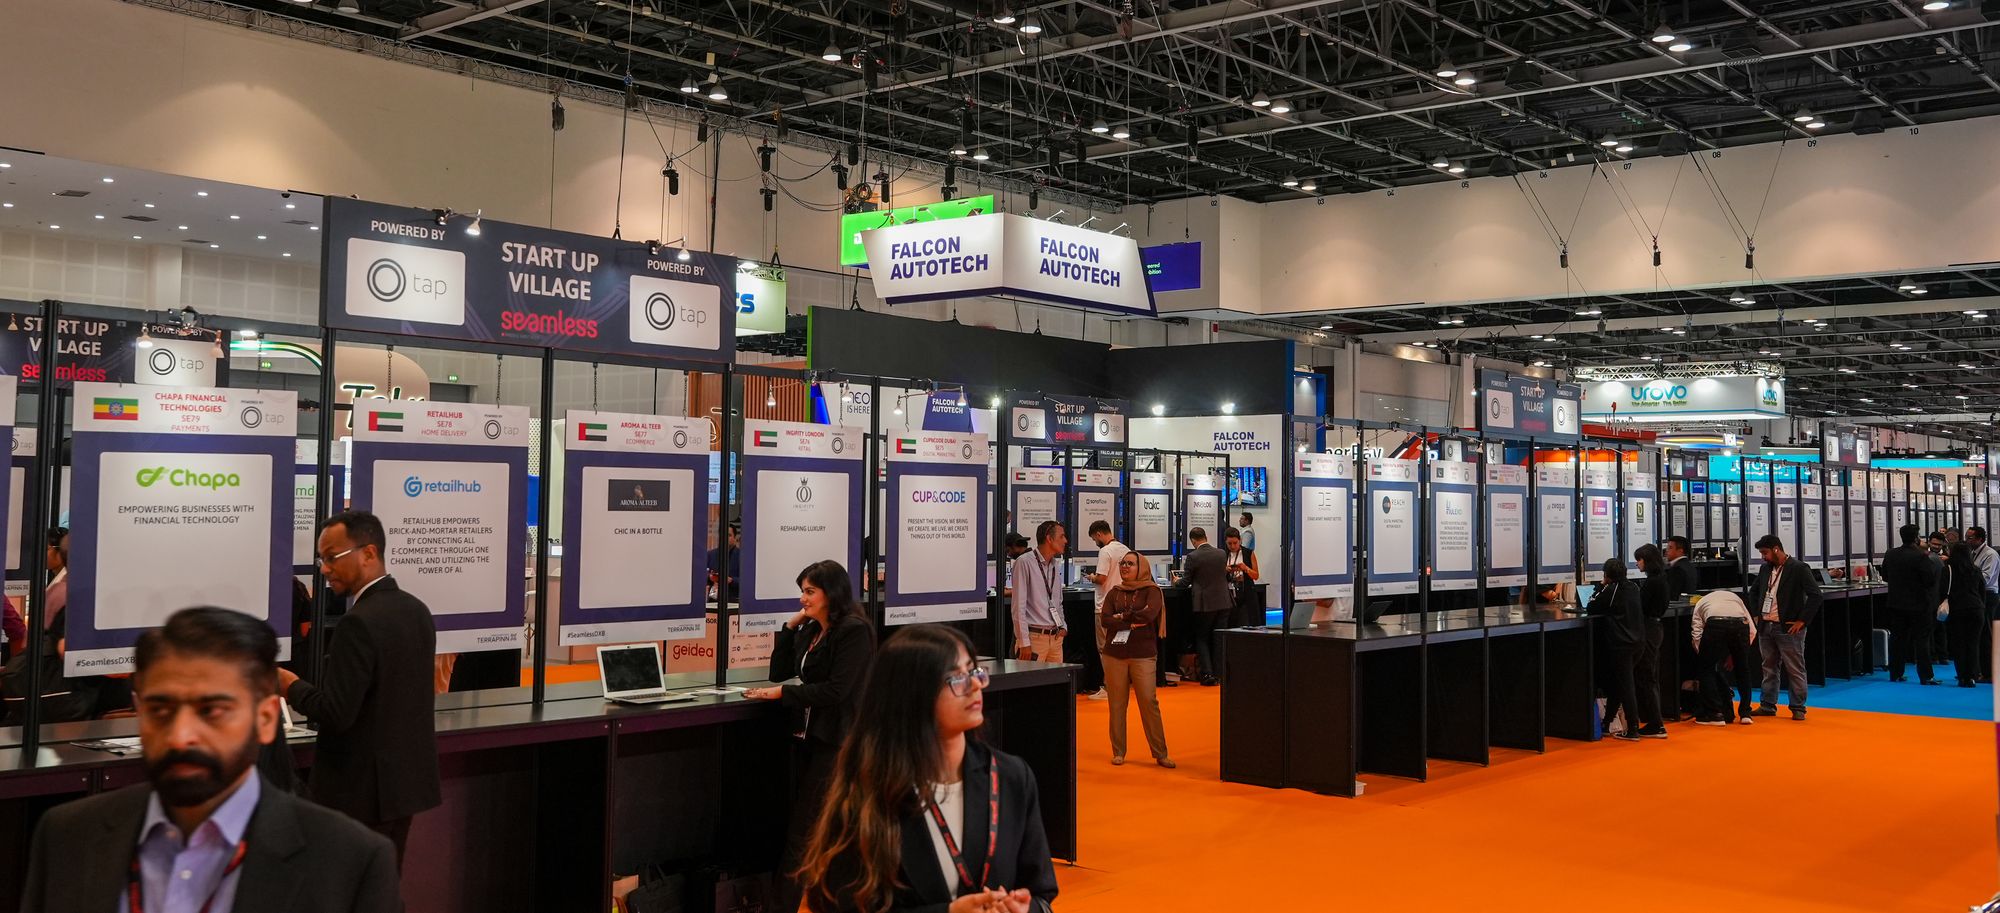 300+ innovative startups exhibited at the Startup Village, powered by Tap payments